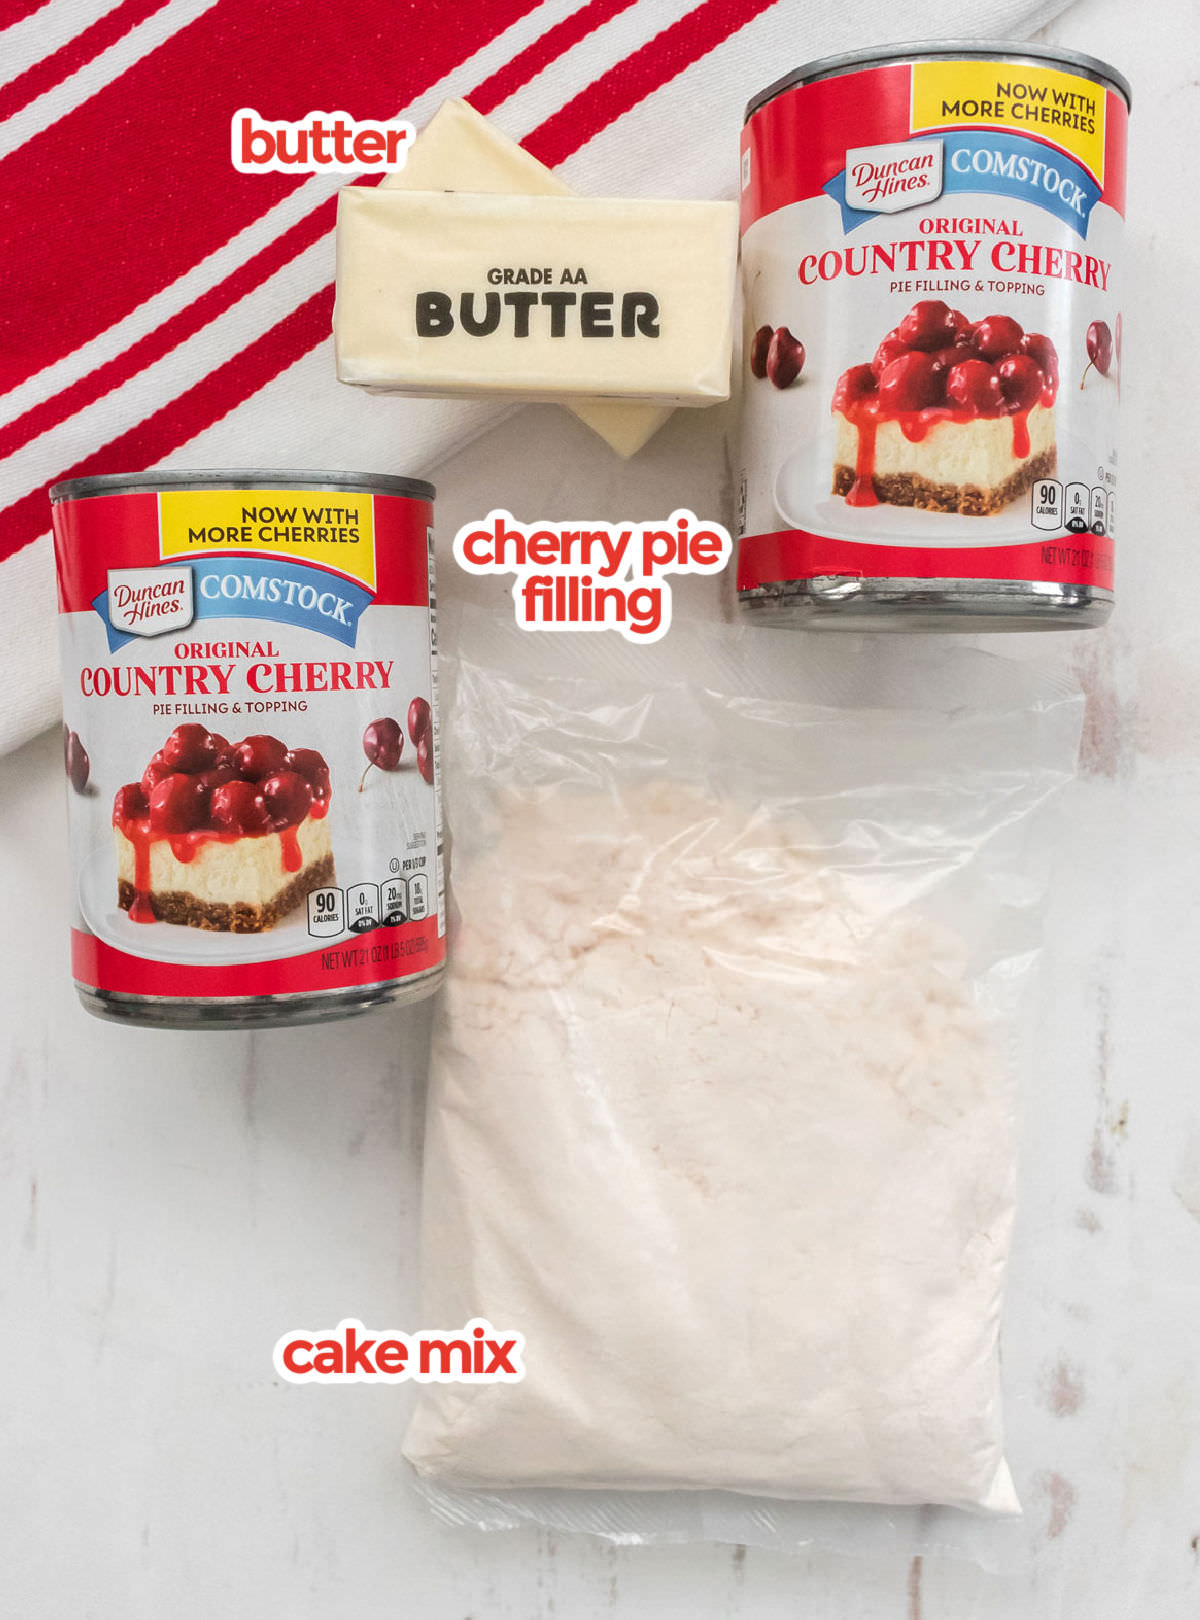 All the ingredients you will need to make a Dump Cake including Butter, Cake Mix and Cherry Pie filing.